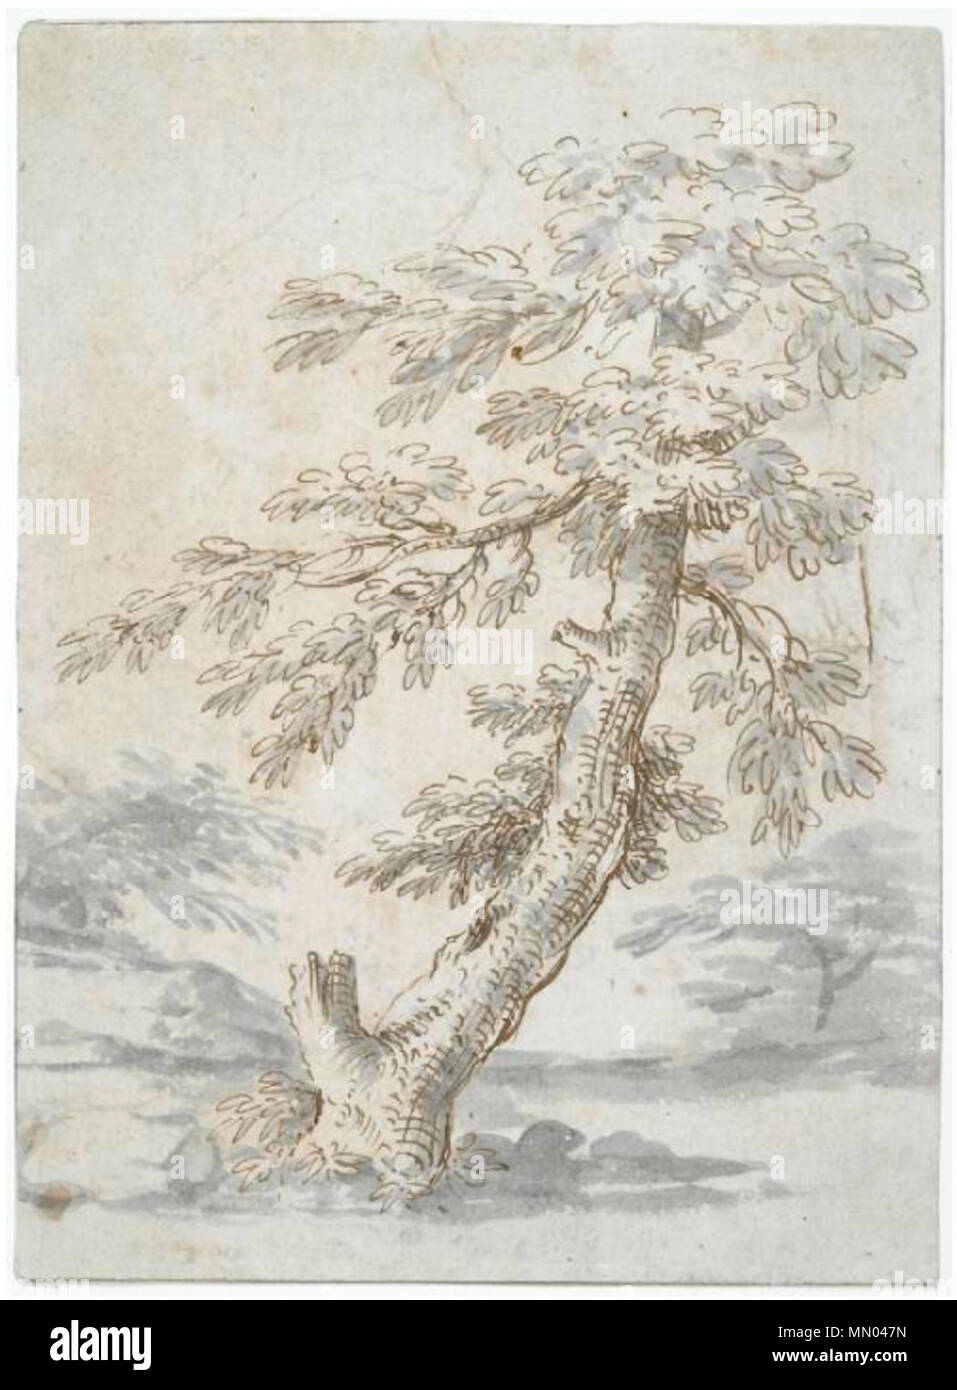 . English: Abraham Genoels, Study of a tree, drawing in pen, brown ink and grey wash, on paper, stuck down; Dimensions: height: 281 mm and width: 206 mm; 17th–early 18th century, The Fitzwilliam Museum  . 17th–early 18th century.   Abraham Genoels  (1640–1723)     Alternative names Archimedes, Abraham Genouil  Description Flemish painter, draughtsman and etcher  Date of birth/death 25 May 1640 10 May 1723  Location of birth/death Antwerp Antwerp  Work location Antwerp, Paris (1659-1672), Antwerp (1669-1674), Rome (September 1674-1682), Paris (1682), Antwerp (8 December 1682-1723)  Authority co Stock Photo